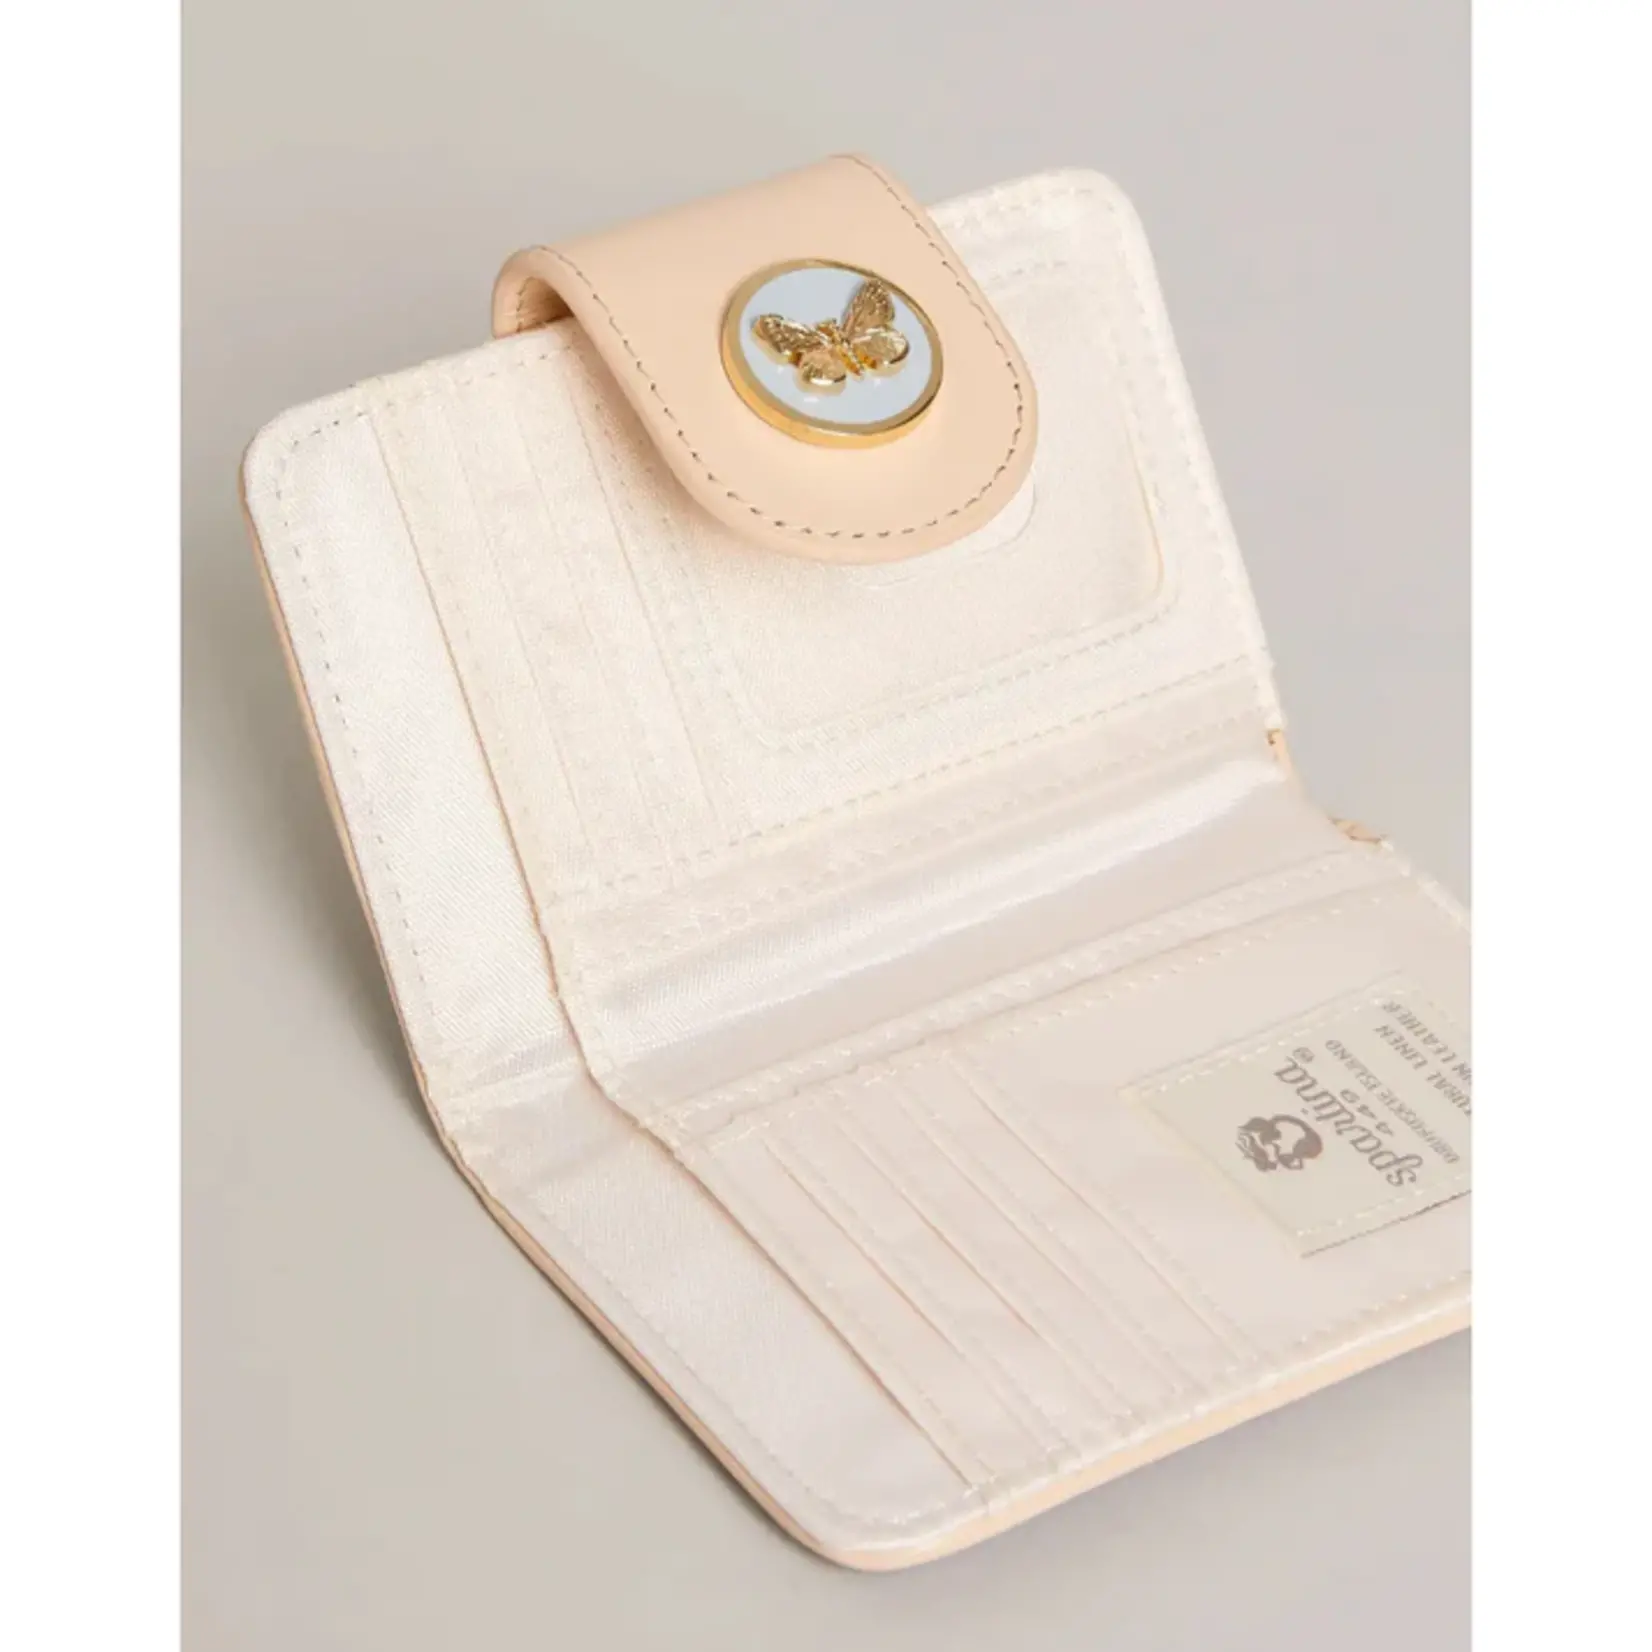 Spartina 449 SPARTINA YACHT CLUB MINI WALLET OYSTER FACTORY